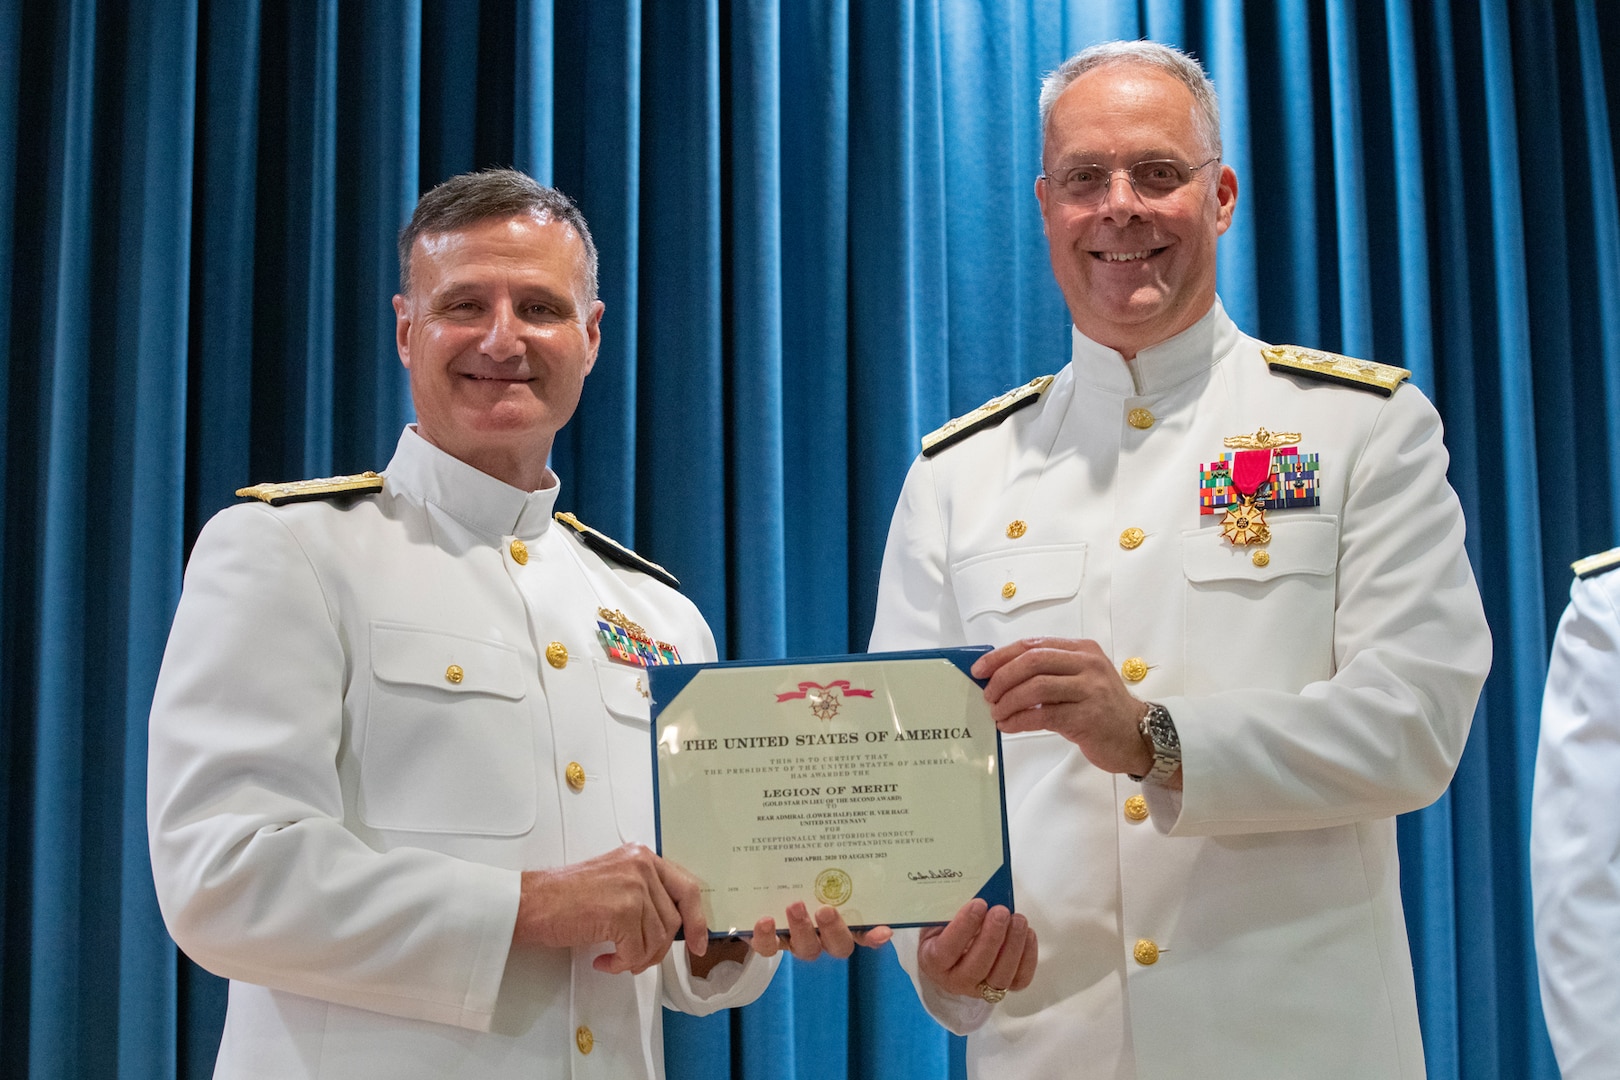 Vice Admiral Bill Galinis, Commander, Naval Sea Systems Command (NAVSEA) presented Rear Adm. Eric Ver Hage, Commander, Navy Regional Maintenance Center (CNRMC) and Director,
Surface Maintenance, Modernization and Sustainment, NAVSEA, with the Legion of Merit Award during the SEA 21 Change of Office Ceremony at the Washington Navy Yard.